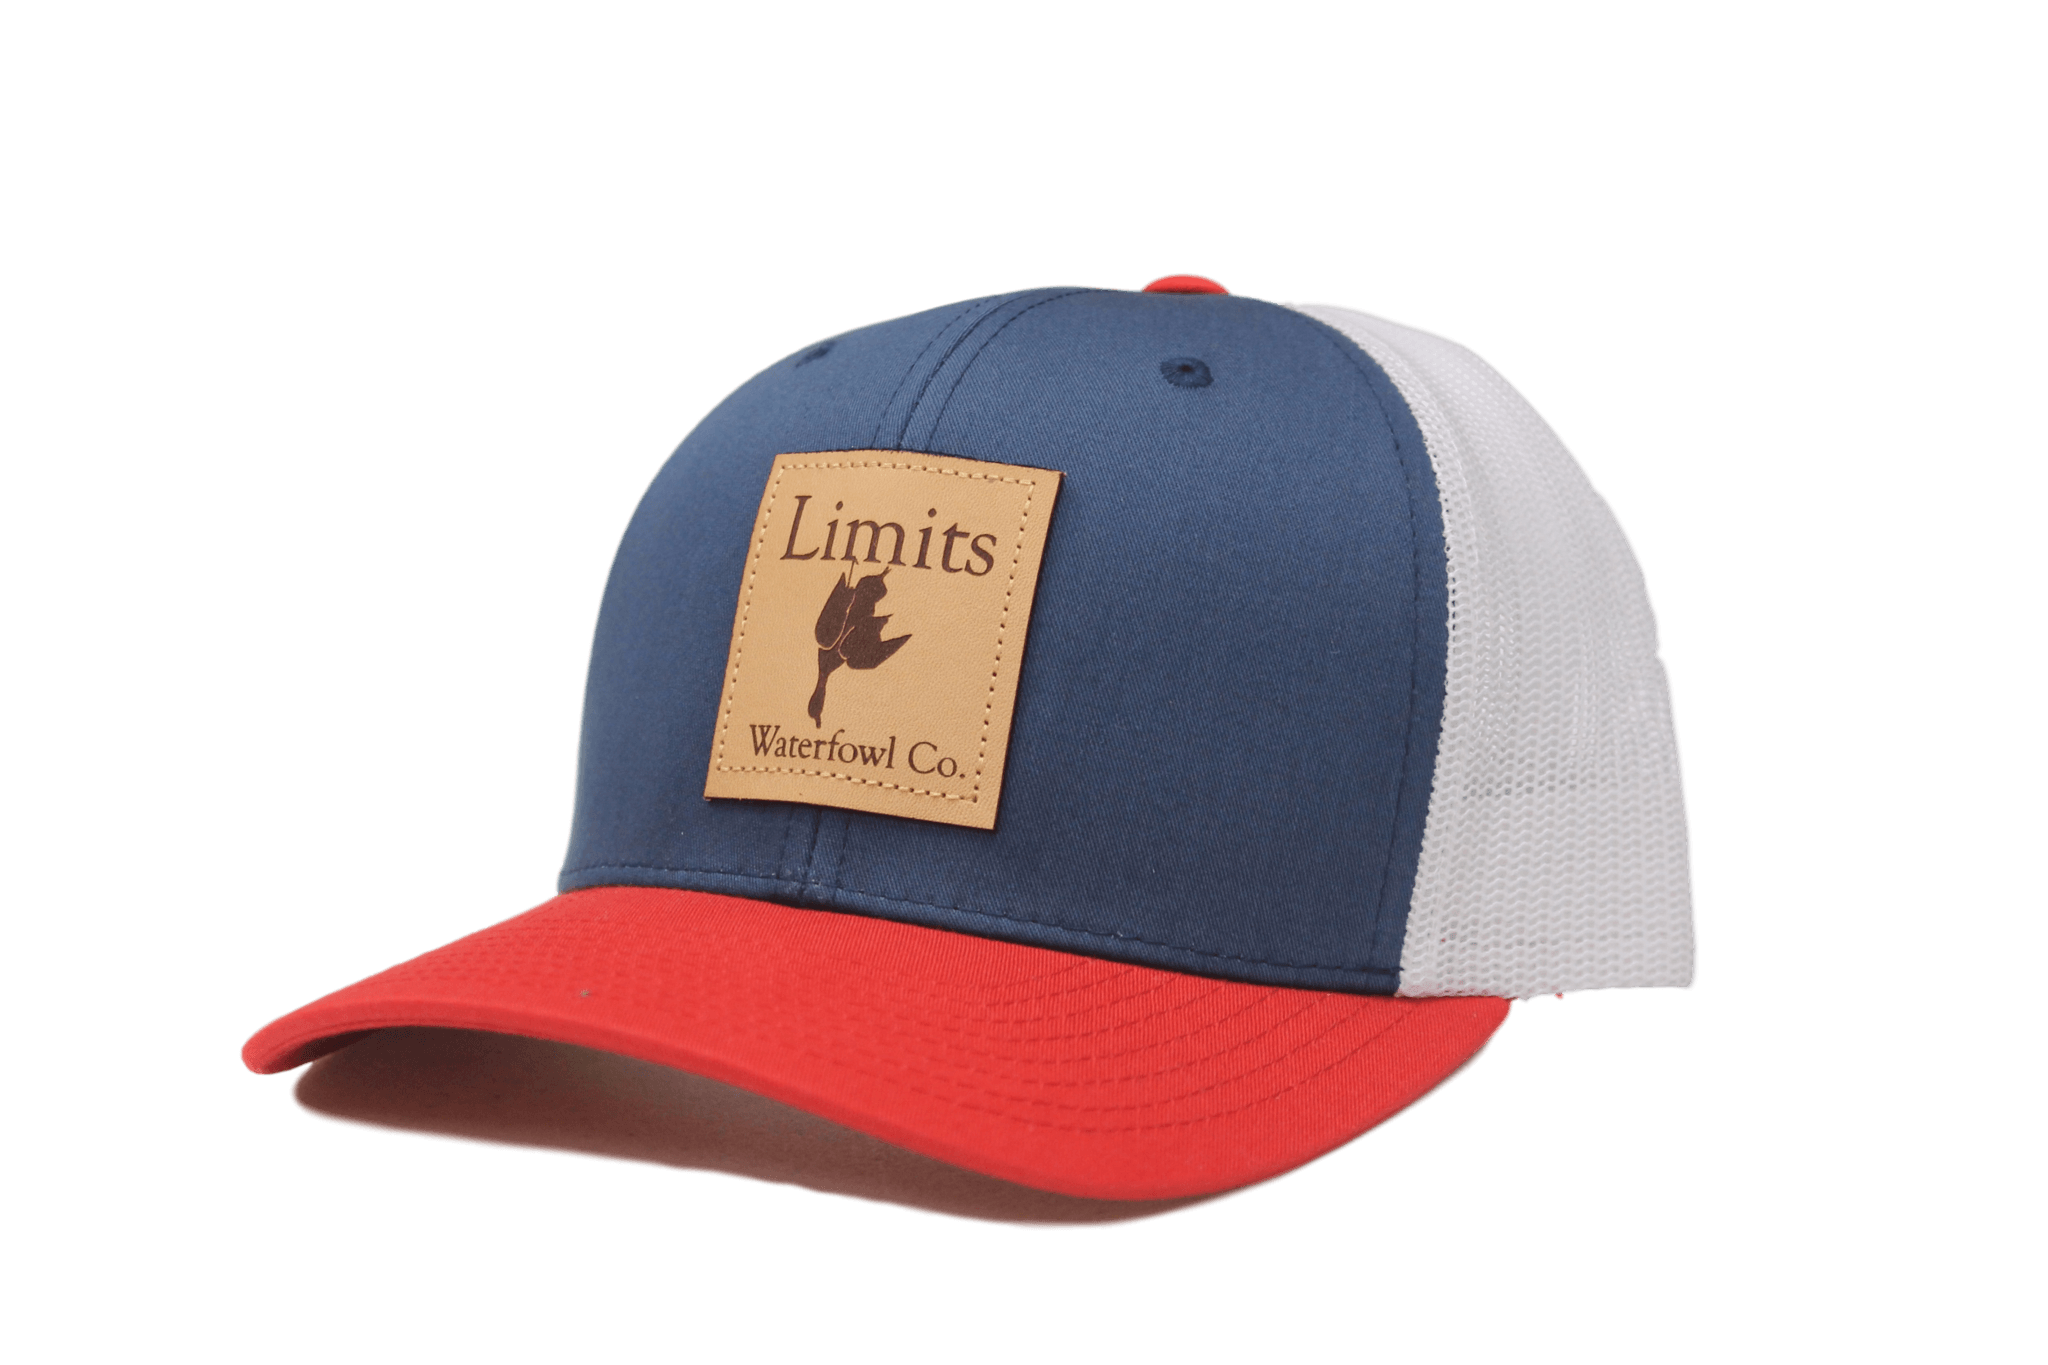 White and Red Square Logo - Square Patch Logo Trucker-Red, White, Blue - Limits Waterfowl Co.